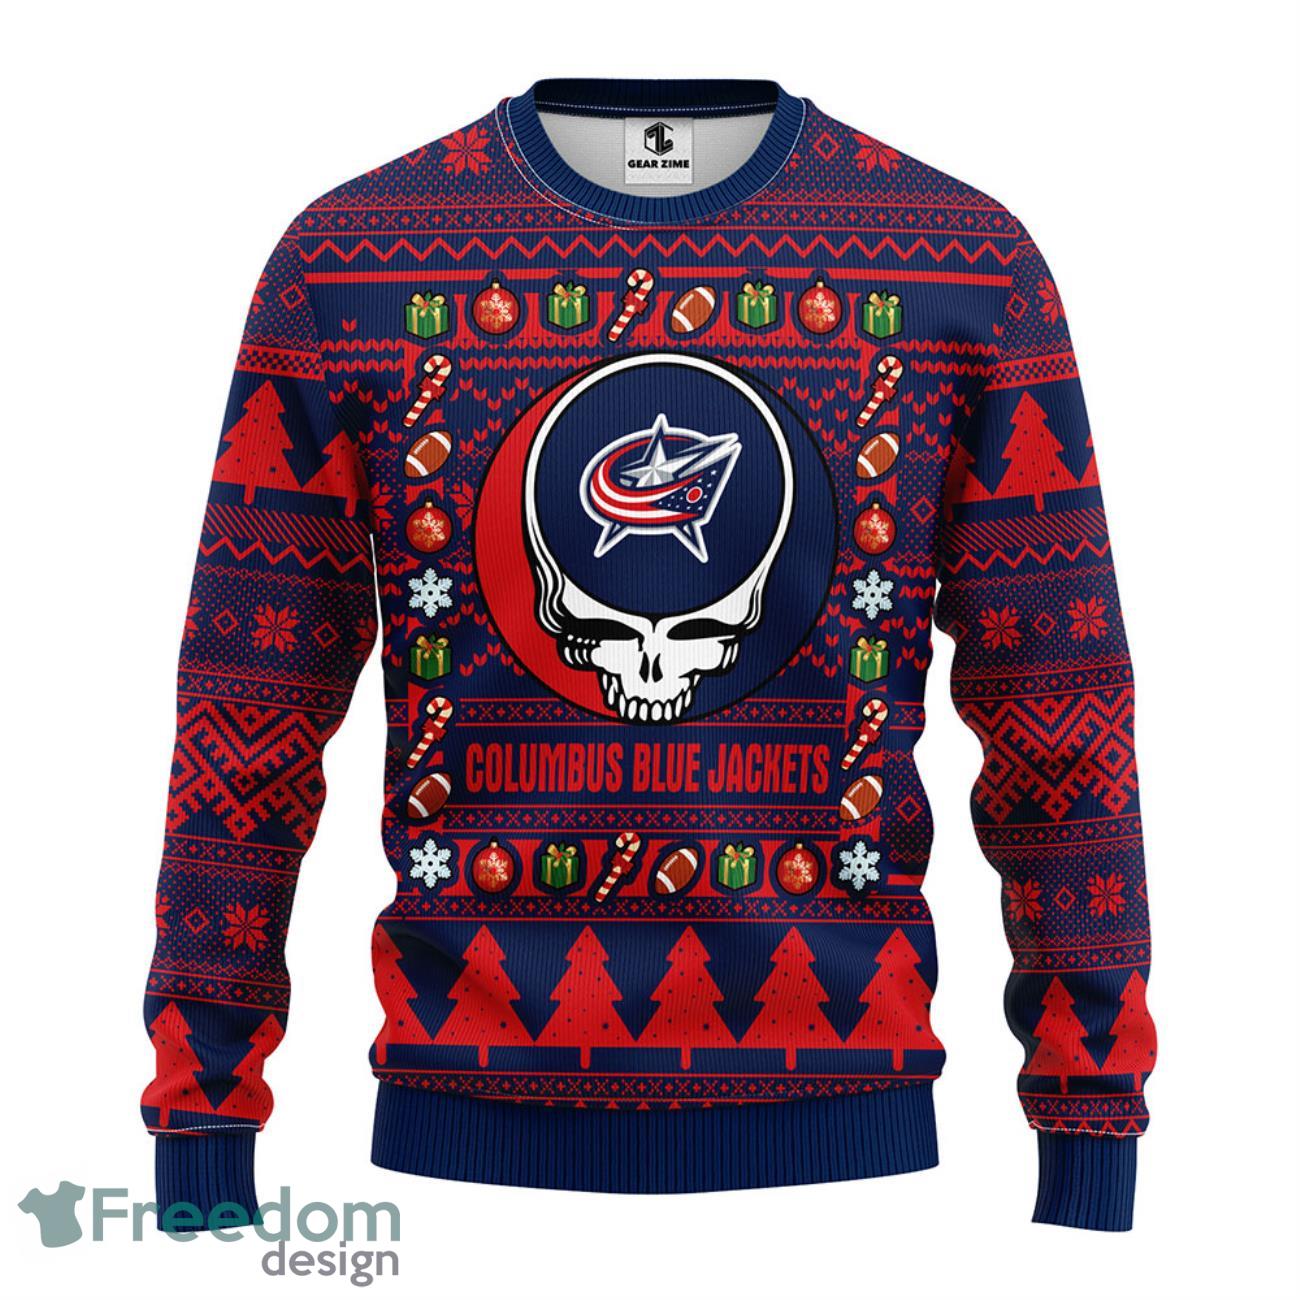 NHL, Sweaters, Bnwt Nhl Vancouver Canucks Ugly Christmas Sweater